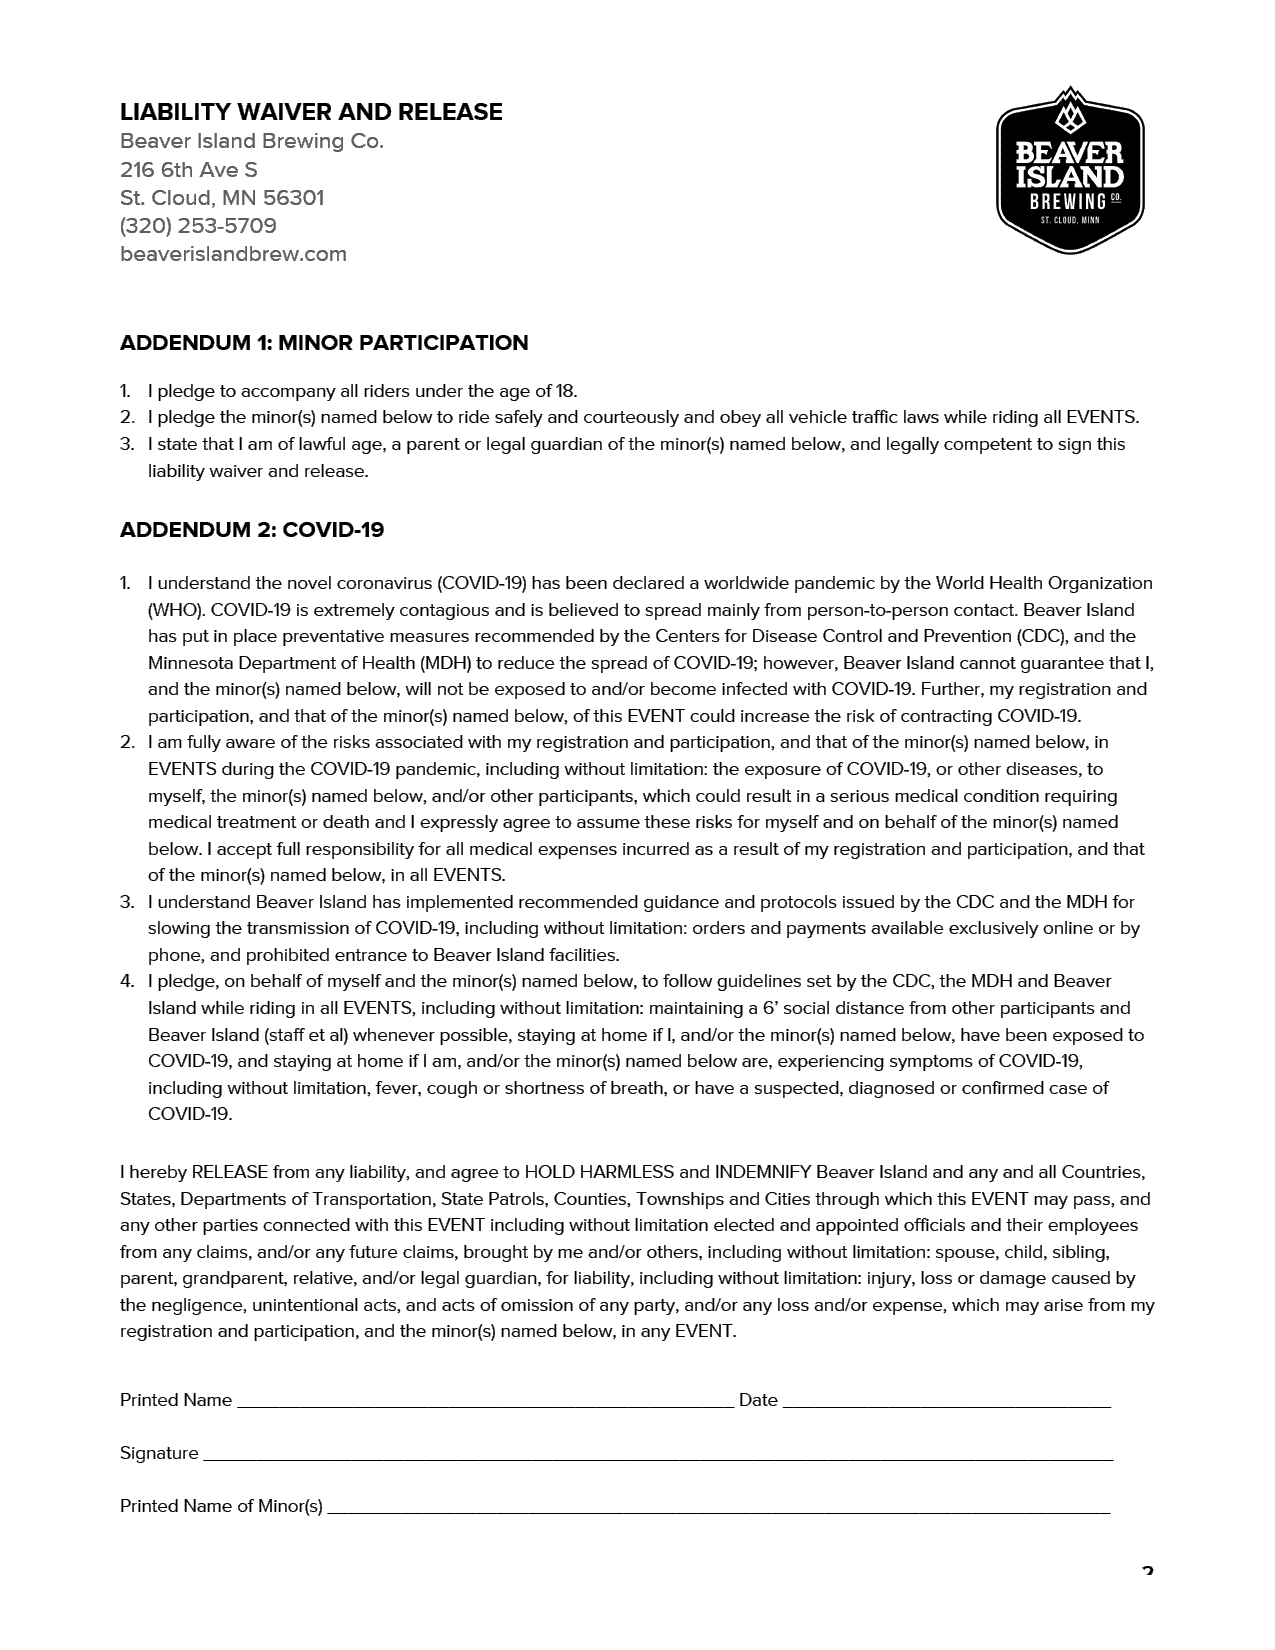 BBB Liability Waiver & Release_pg2